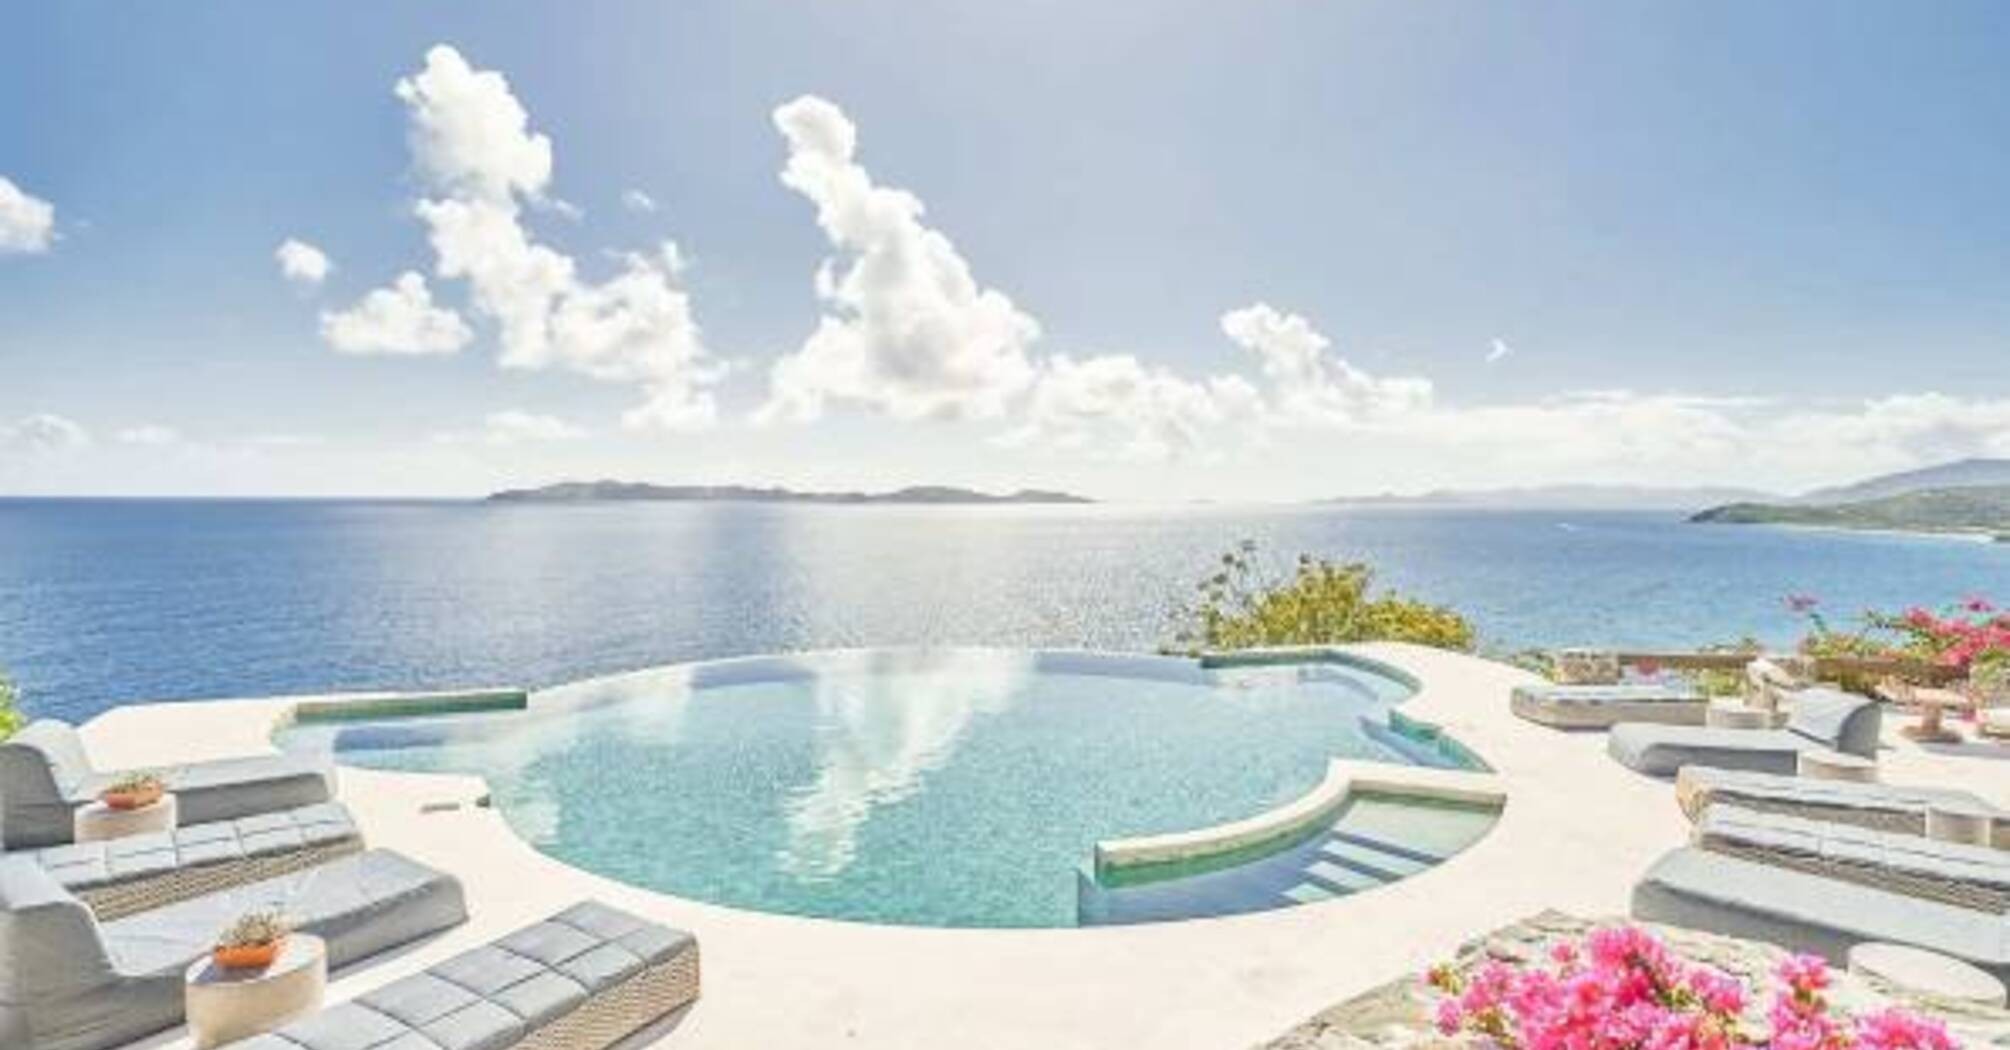 The Aerial is an all-inclusive luxury resort in the British Virgin Islands, from its unique approach to wellness to its charitable missions